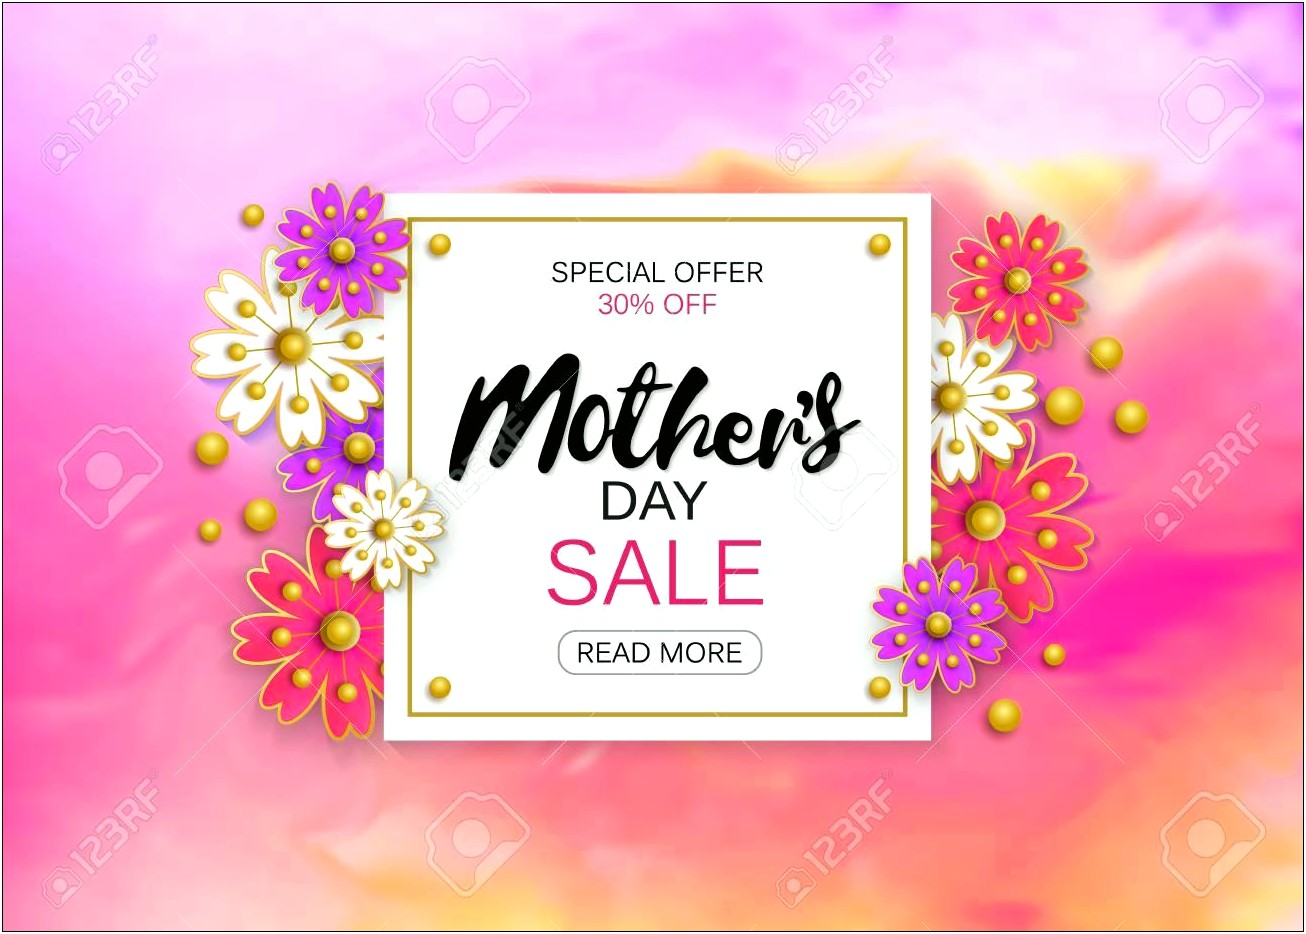 Mother's Day Sale Flyer Template Free